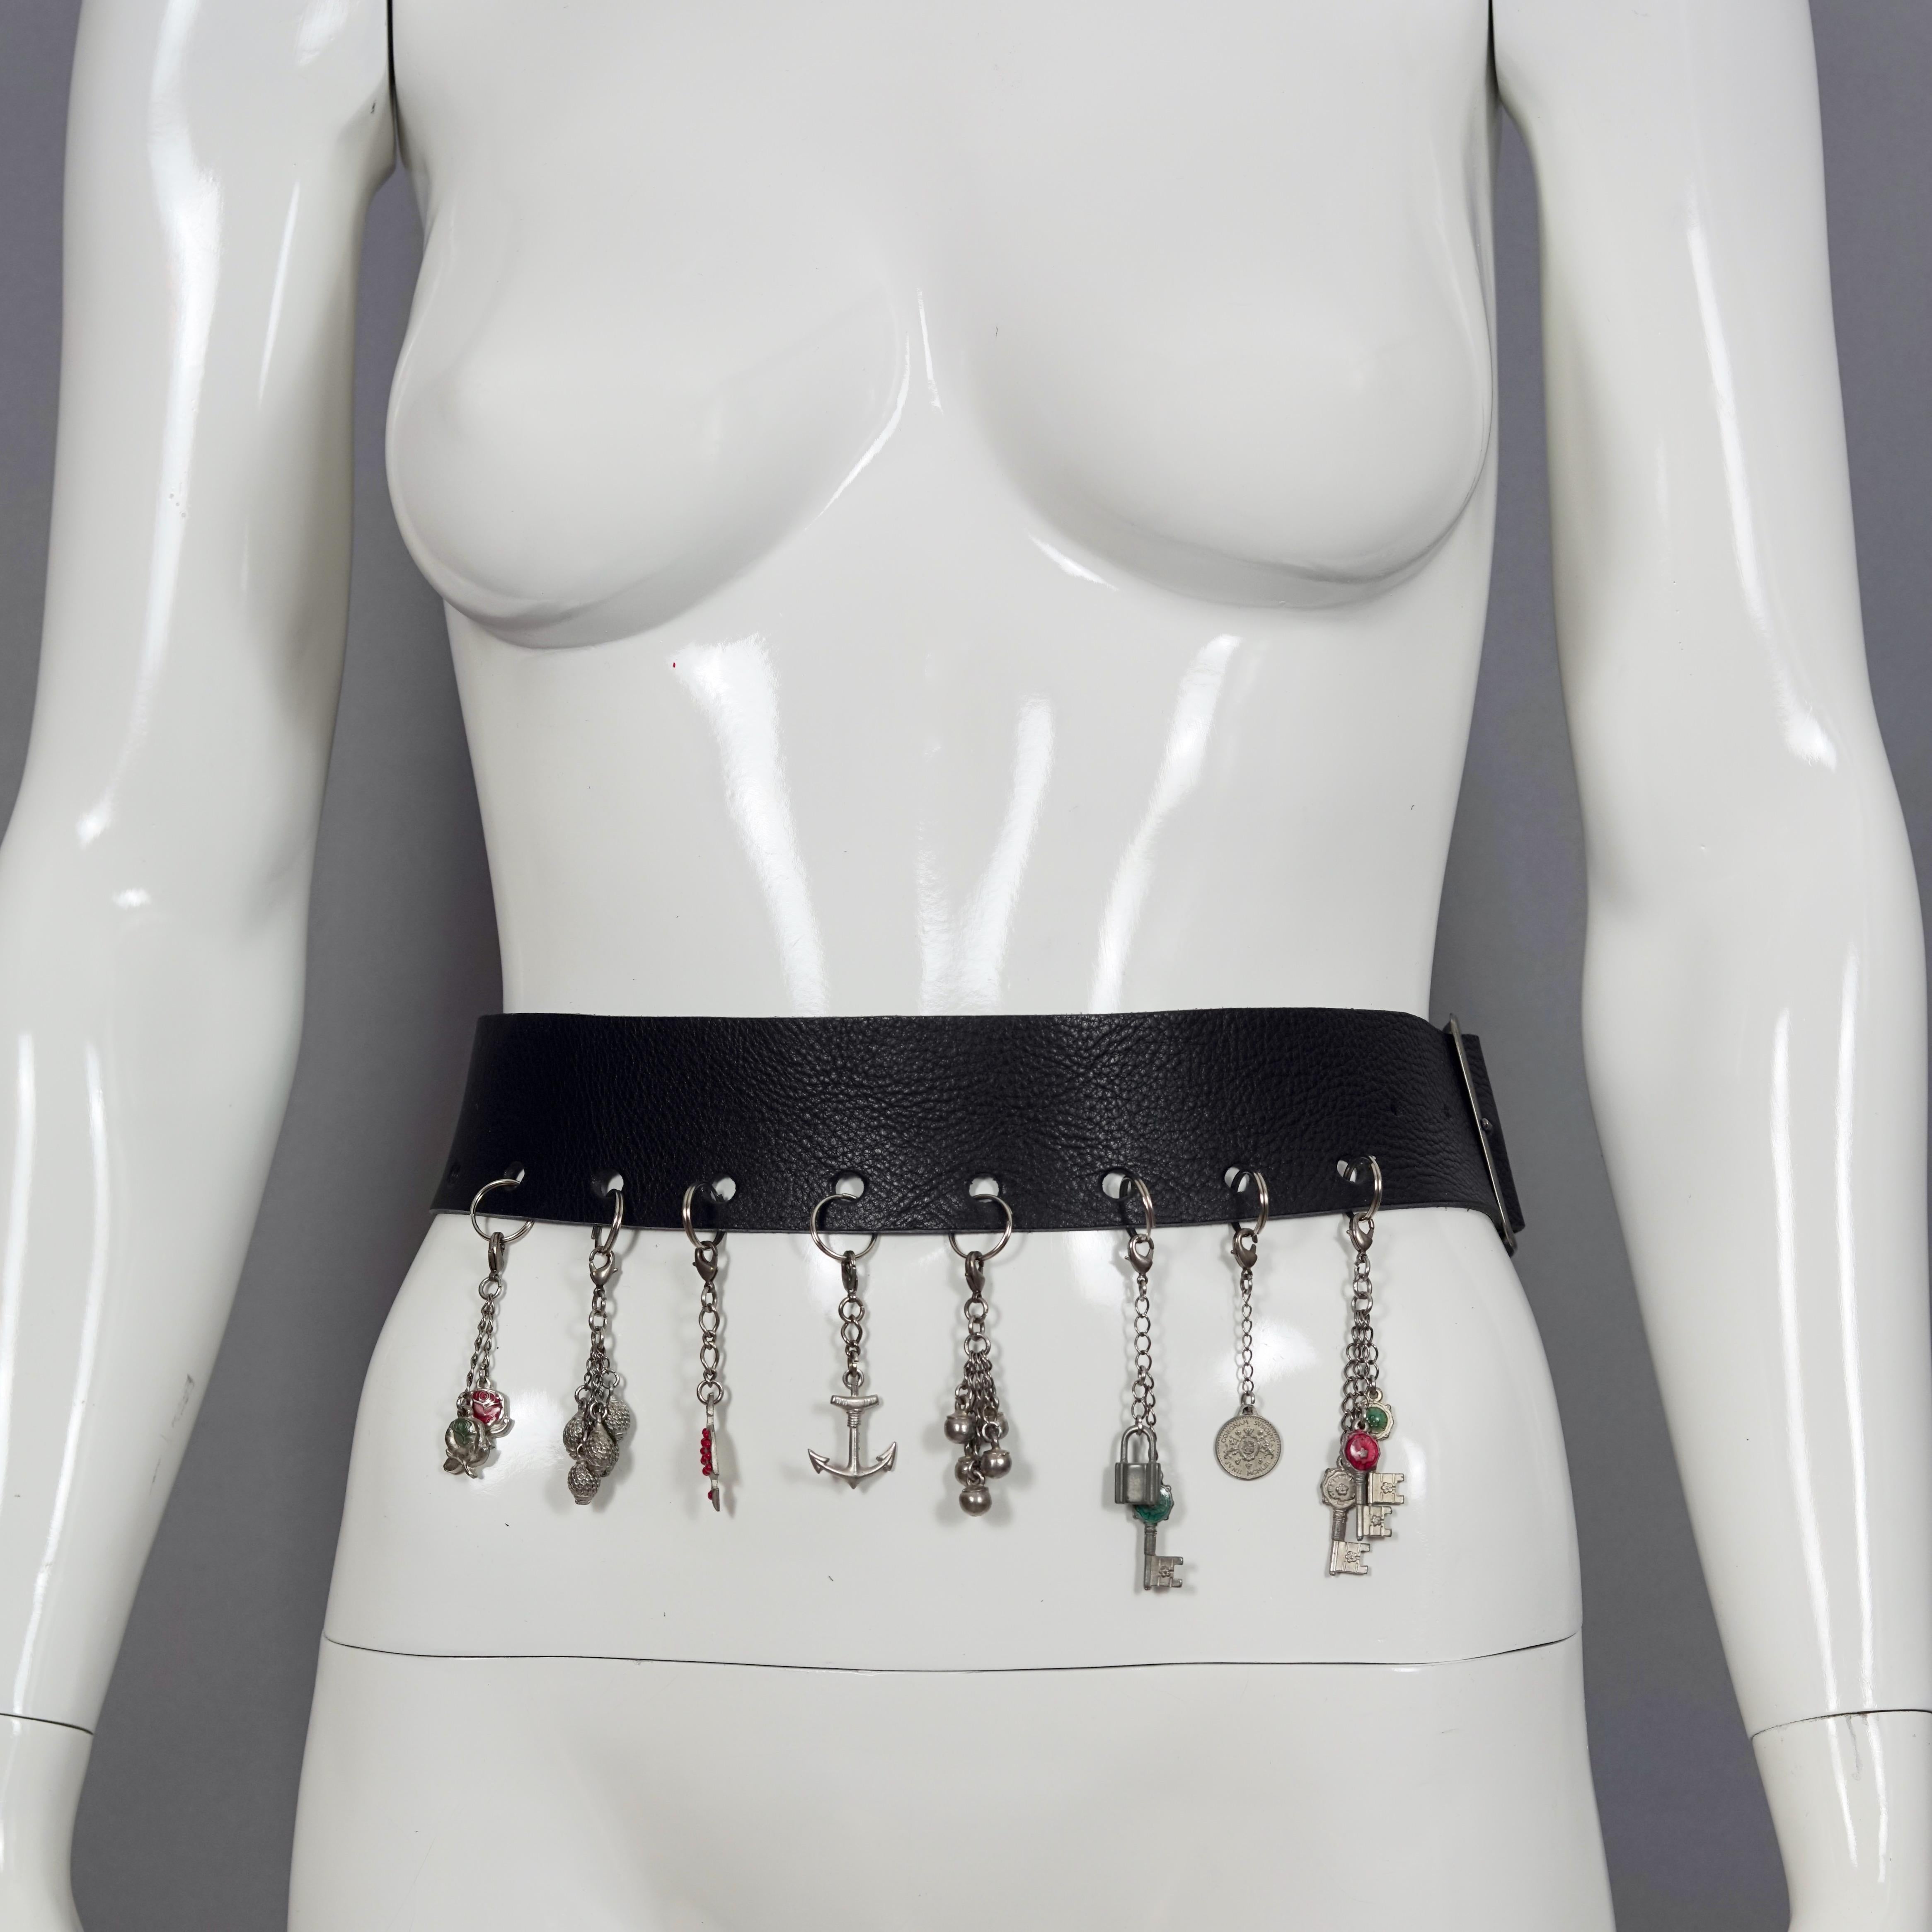 Vintage JEAN PAUL GAULTIER Figural Metal Charm Emblem Belt

Measurements:
Leather Strap Height: 1.96 inches (5 cm)
Charm Height: 3.15 inches (8 cm) longest
Wearable Length: 25.98 inches to 34.25 inches (66 cm to 87 cm)

Features:
- 100% Authentic